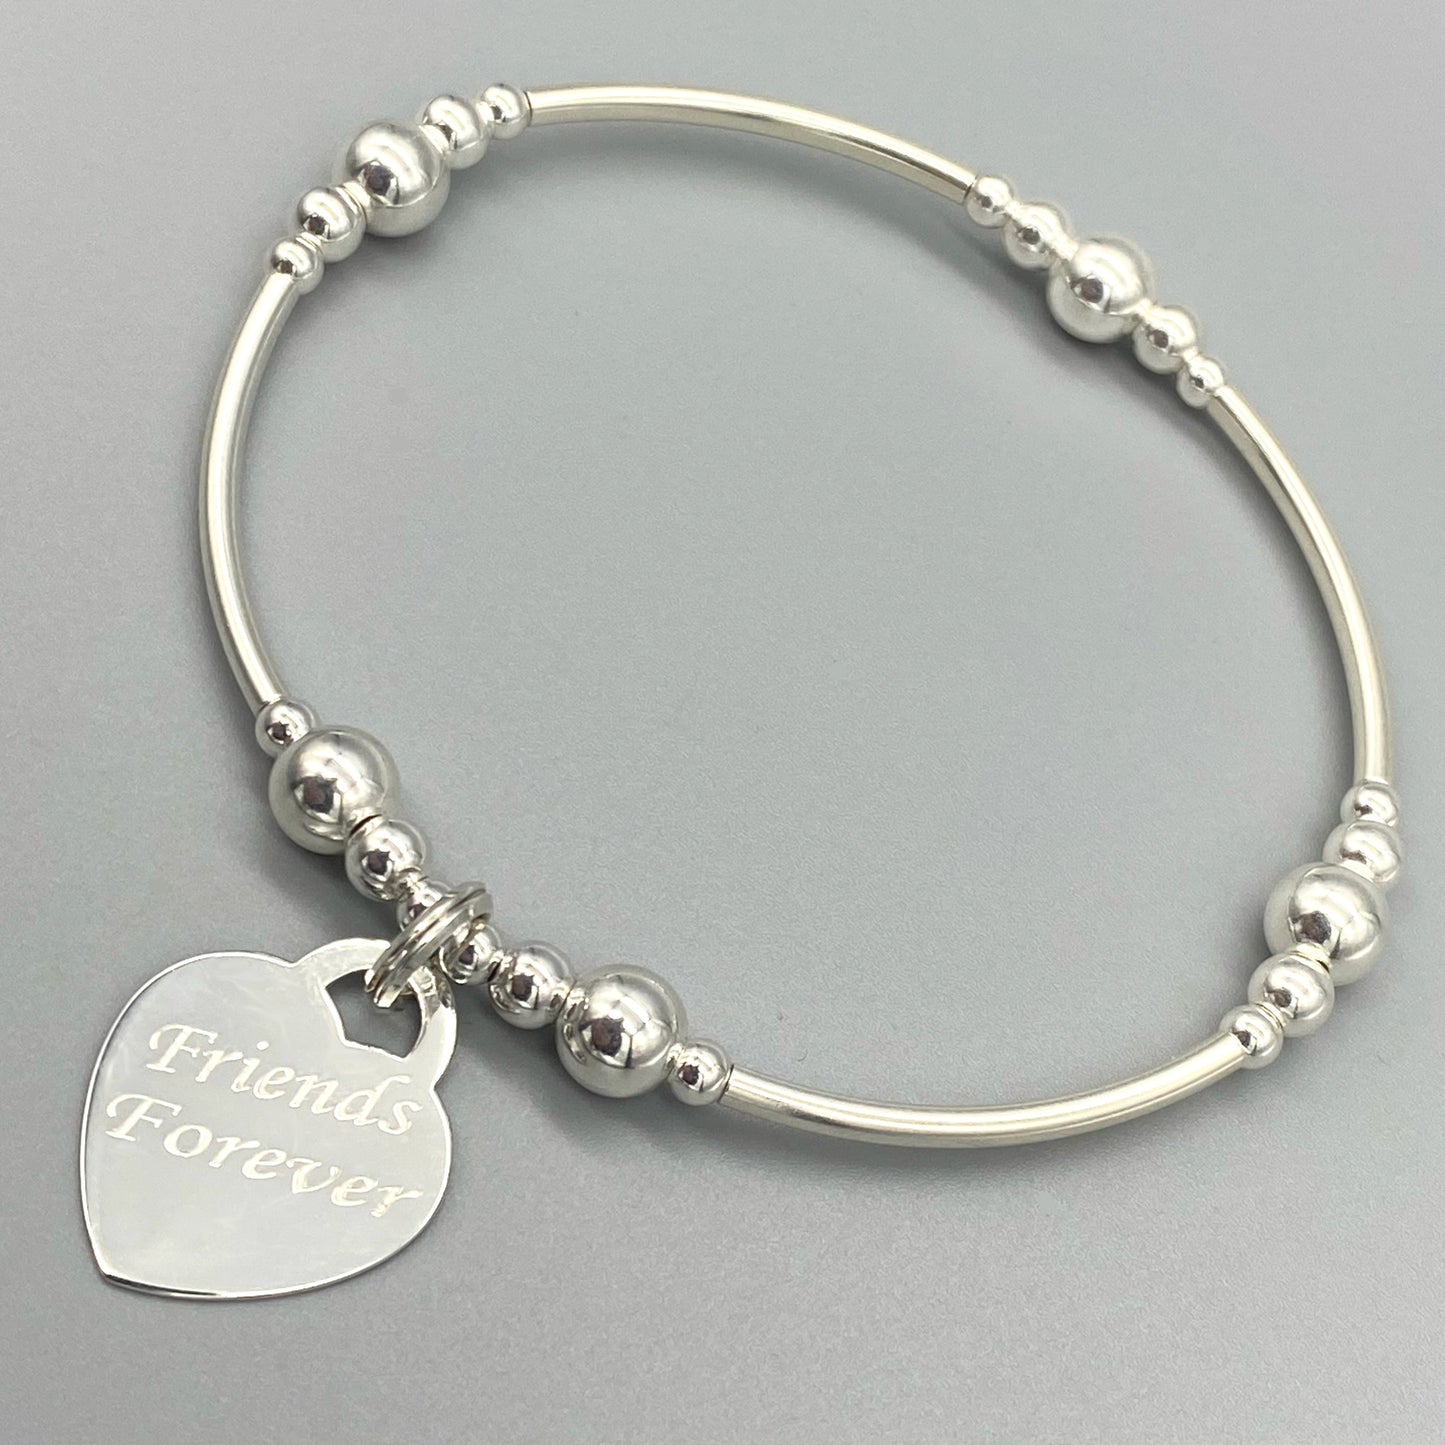 "Friends Forever" heart charm sterling silver stacking bracelet for her by My Silver Wish